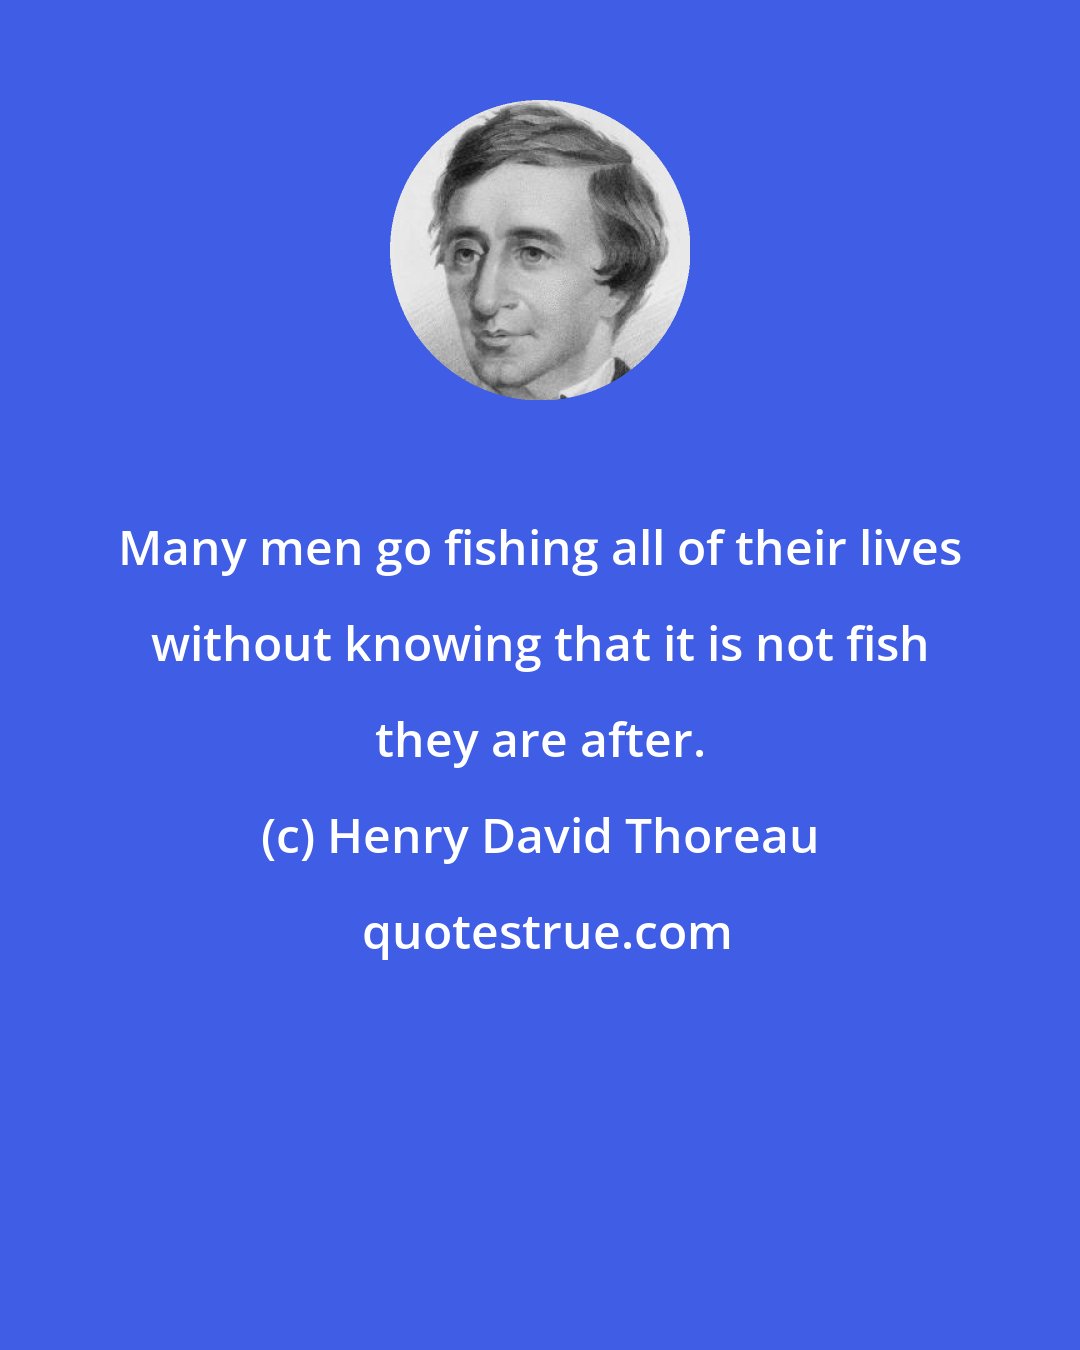 Henry David Thoreau: Many men go fishing all of their lives without knowing that it is not fish they are after.